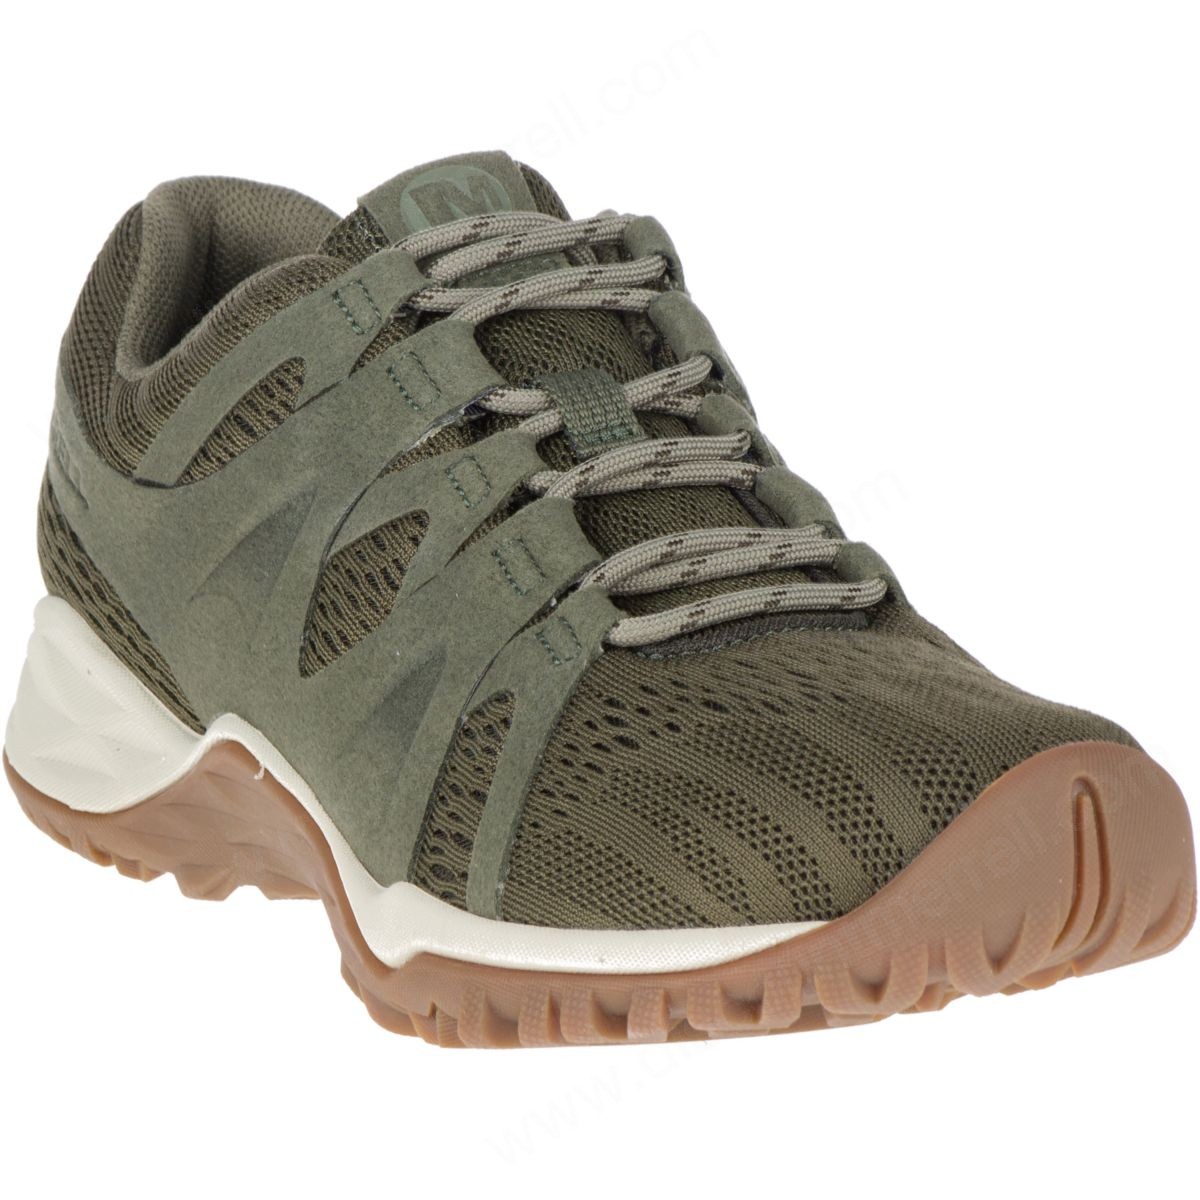 Merrell Lady's Siren Guided Lace Q2 Dusty Olive - -3